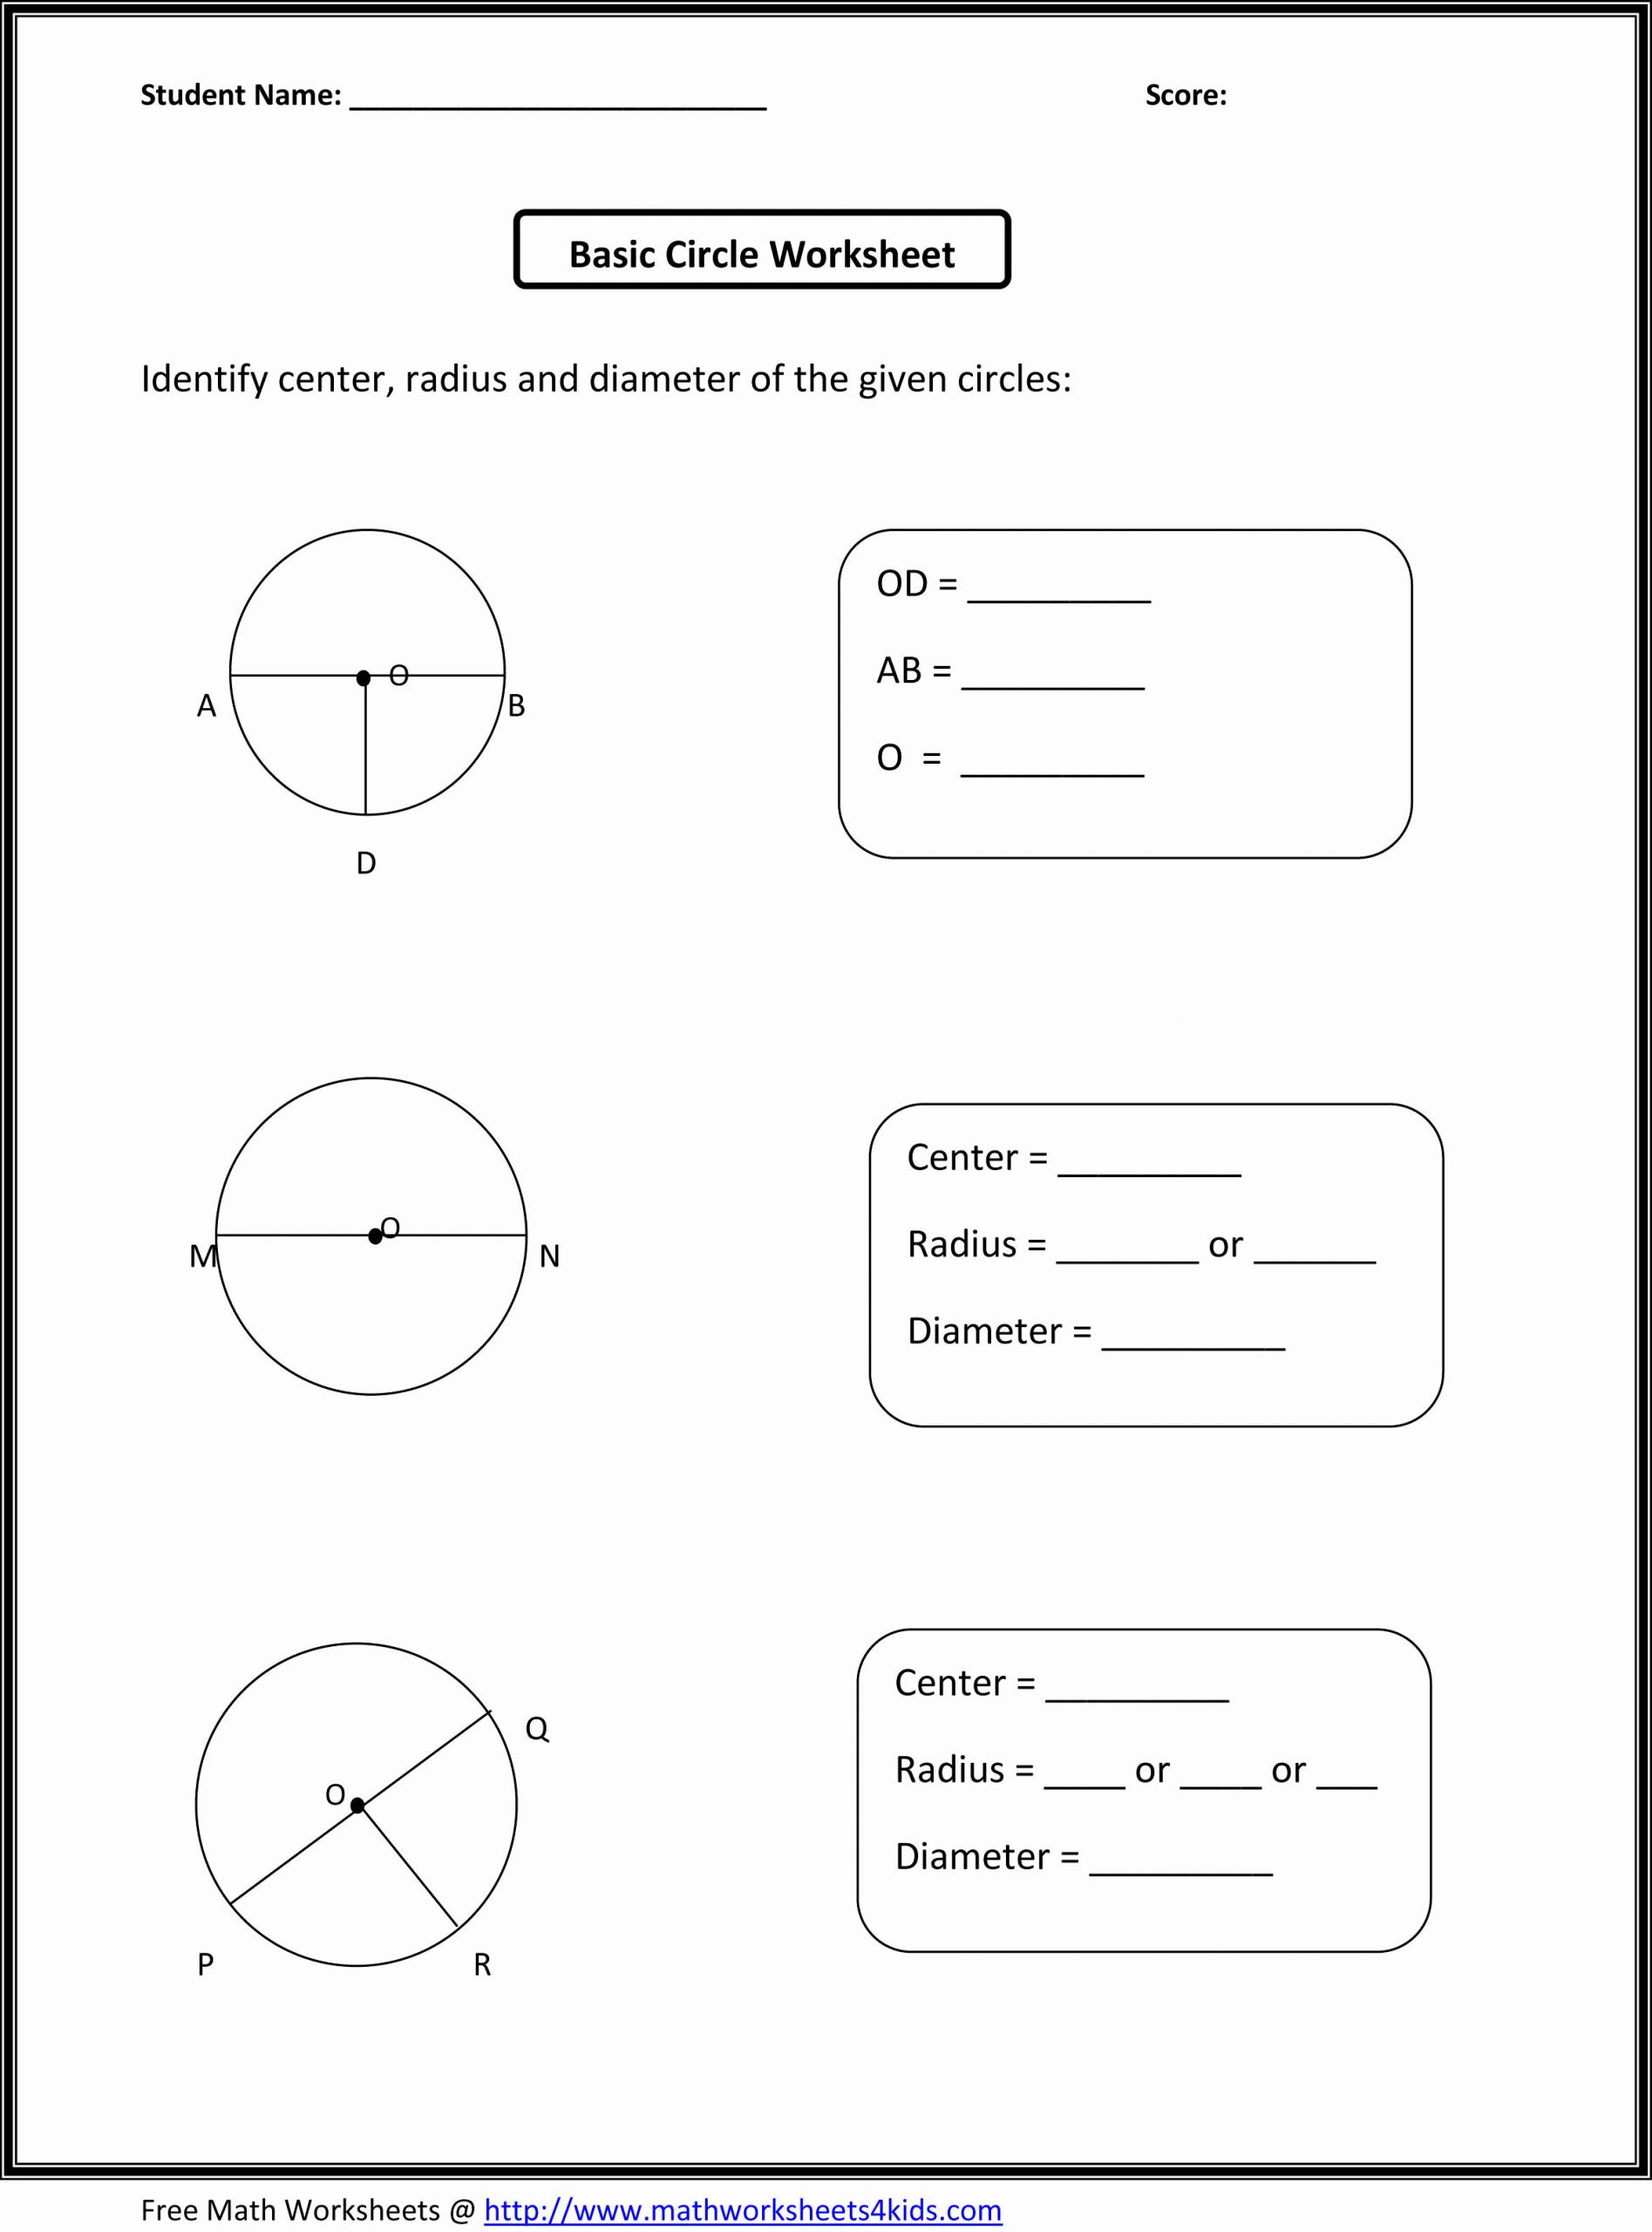 8th grade staar formula chart lovely math worksheets 7th grade staar practice pdf questions 9th algebra of 8th grade staar formula chart